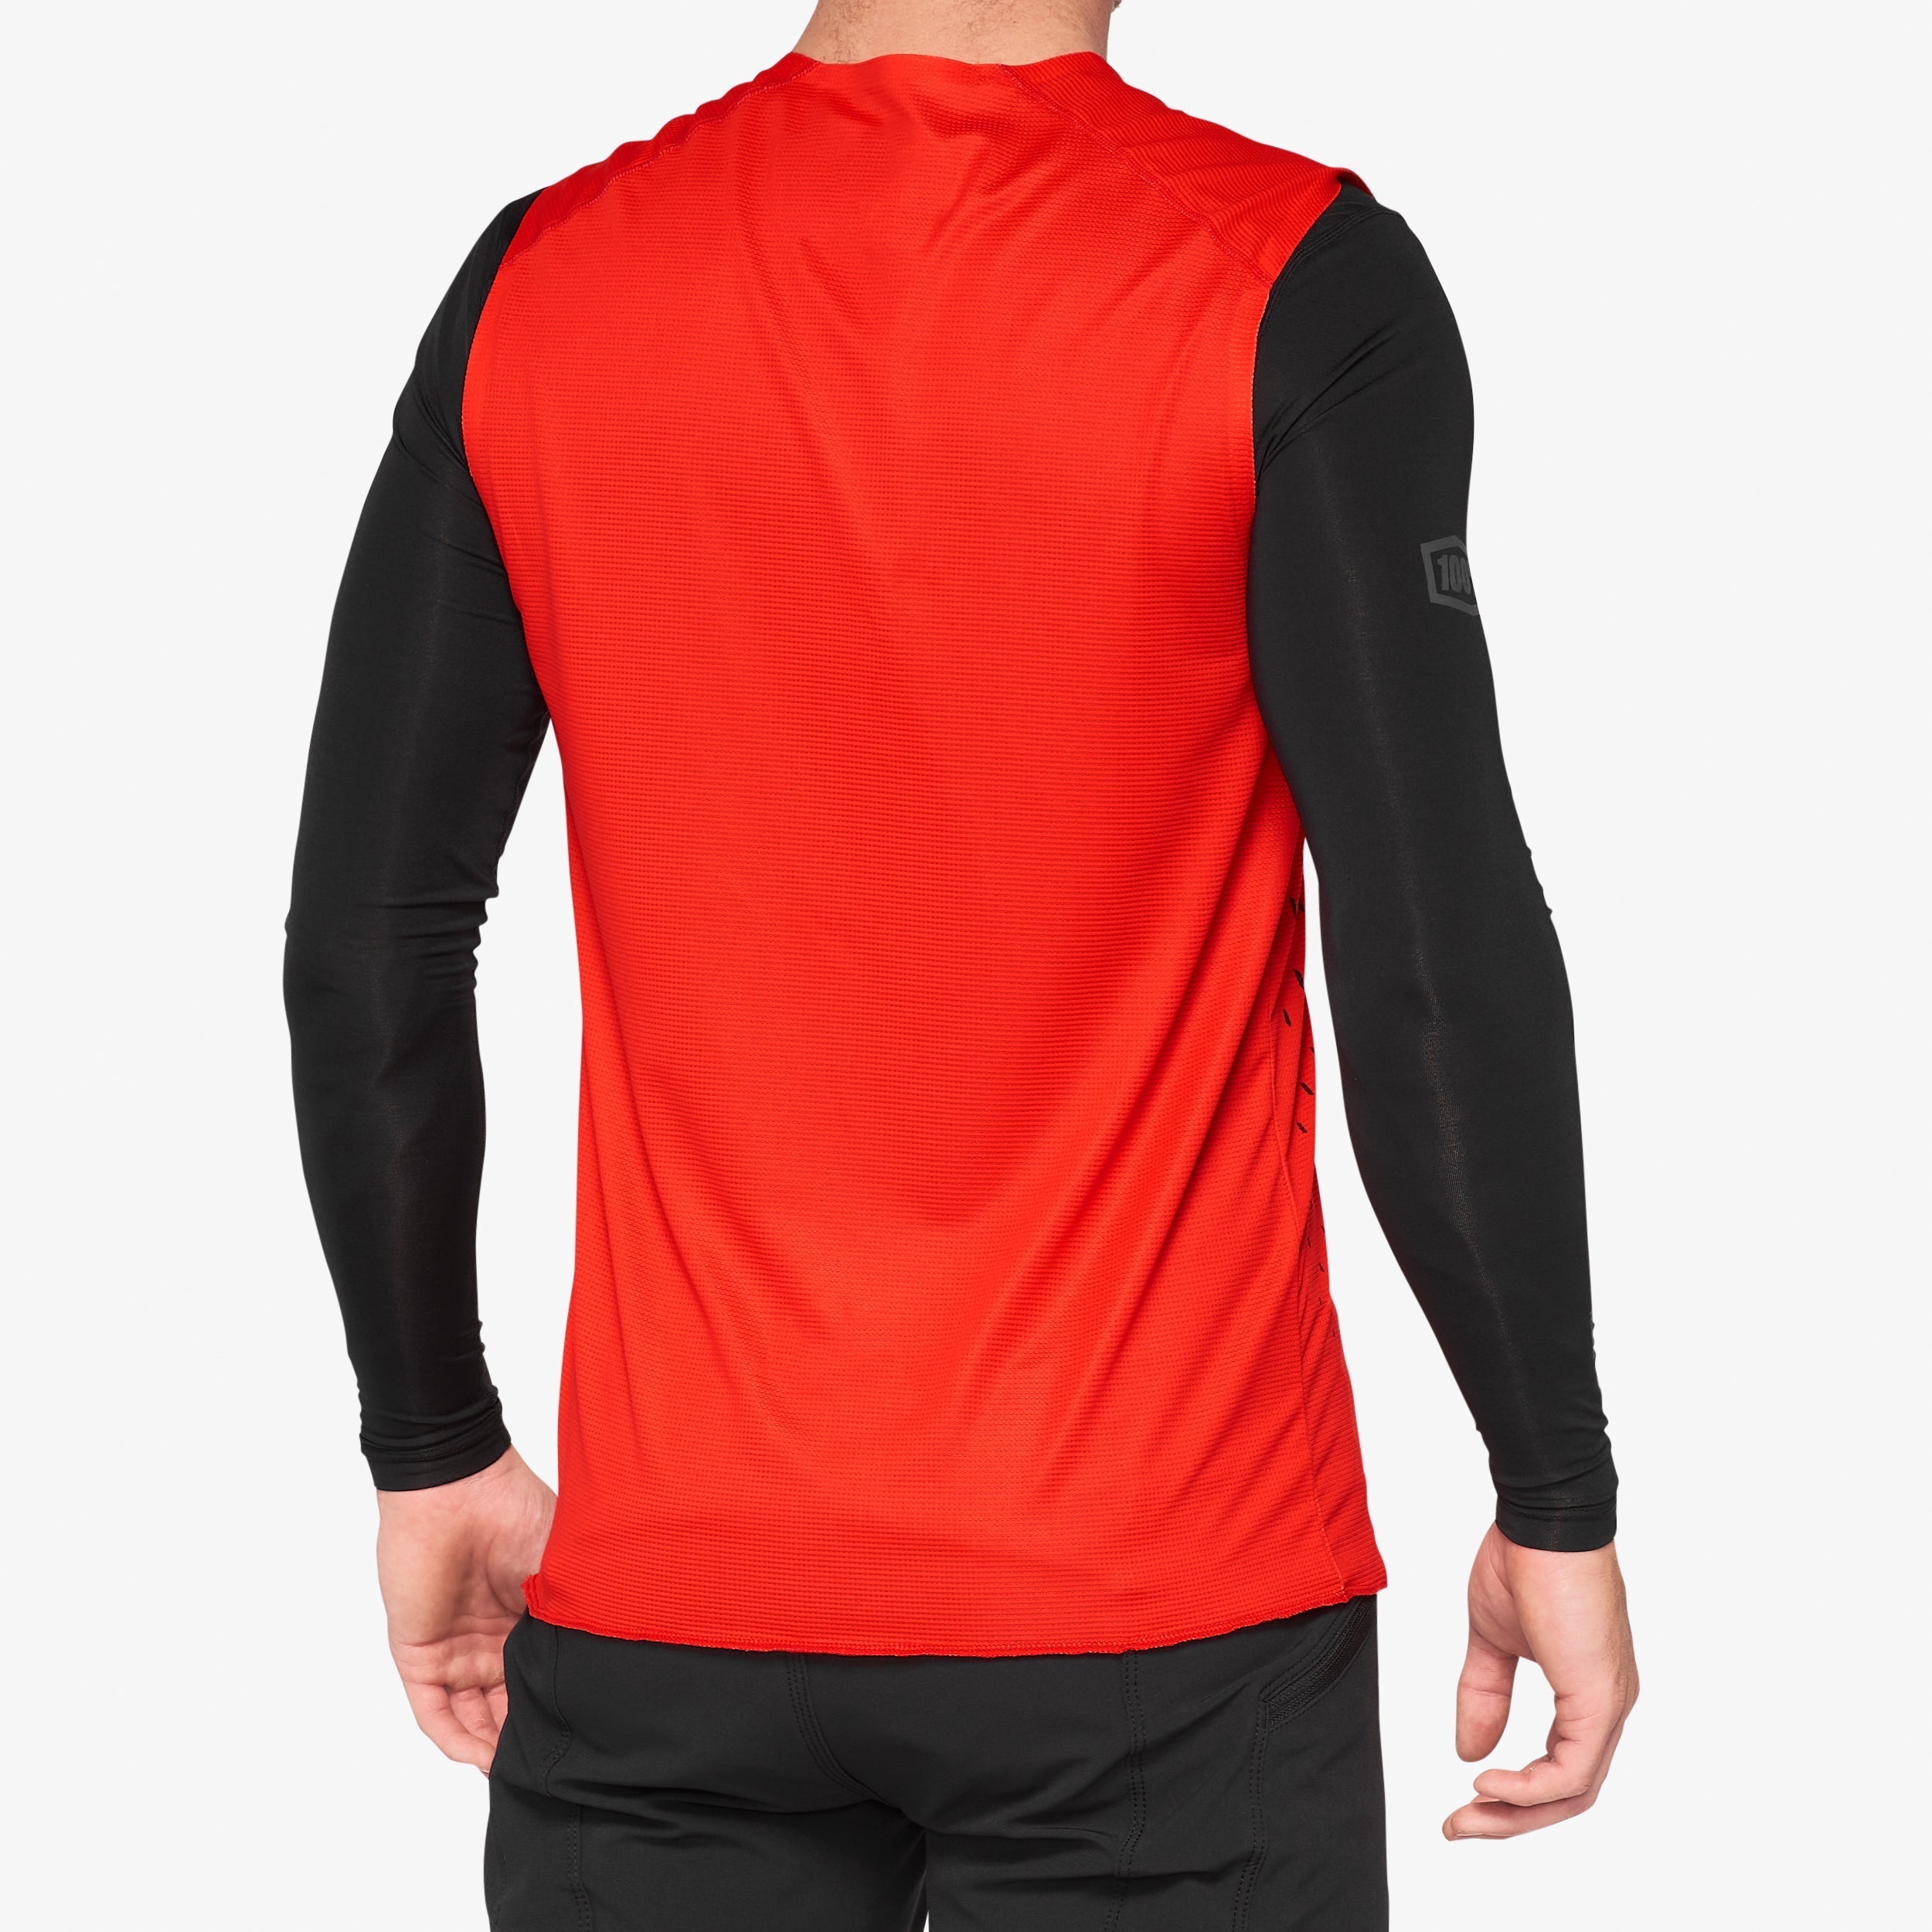 R-CORE CONCEPT Sleeveless Jersey Red